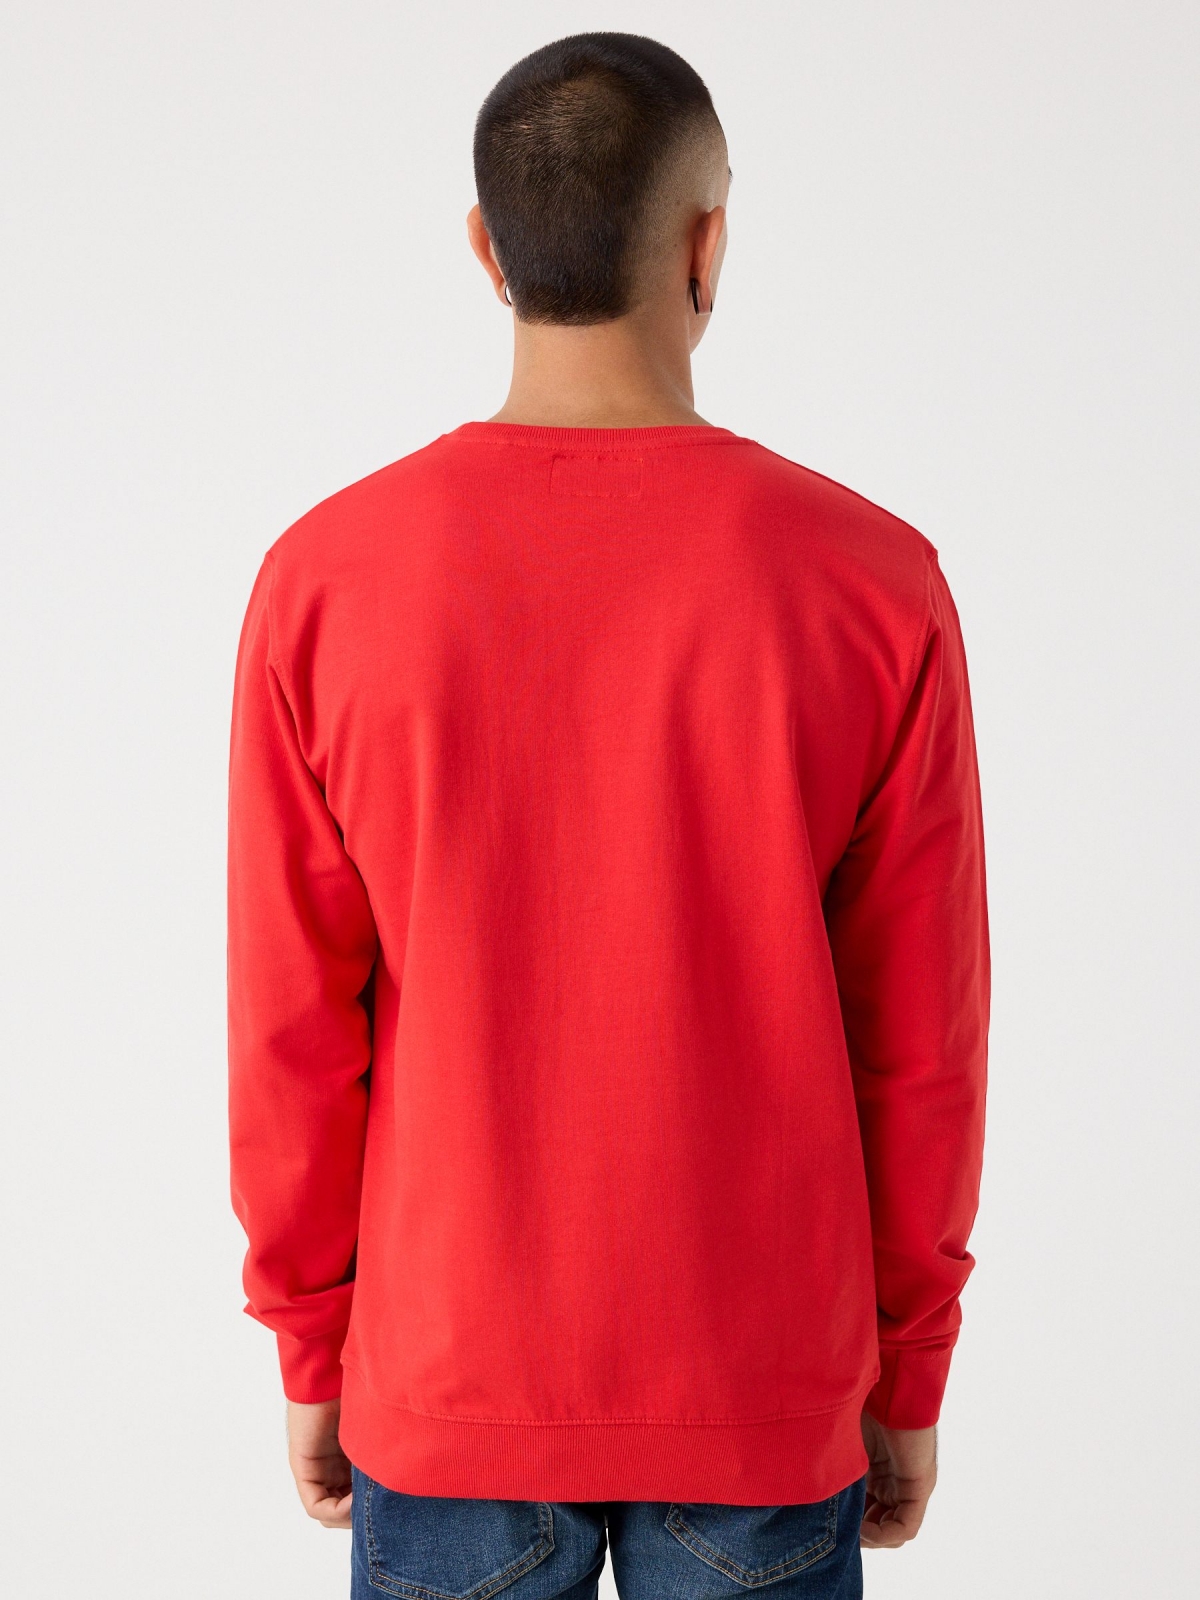 Hoodless sweatshirt with logo red middle back view